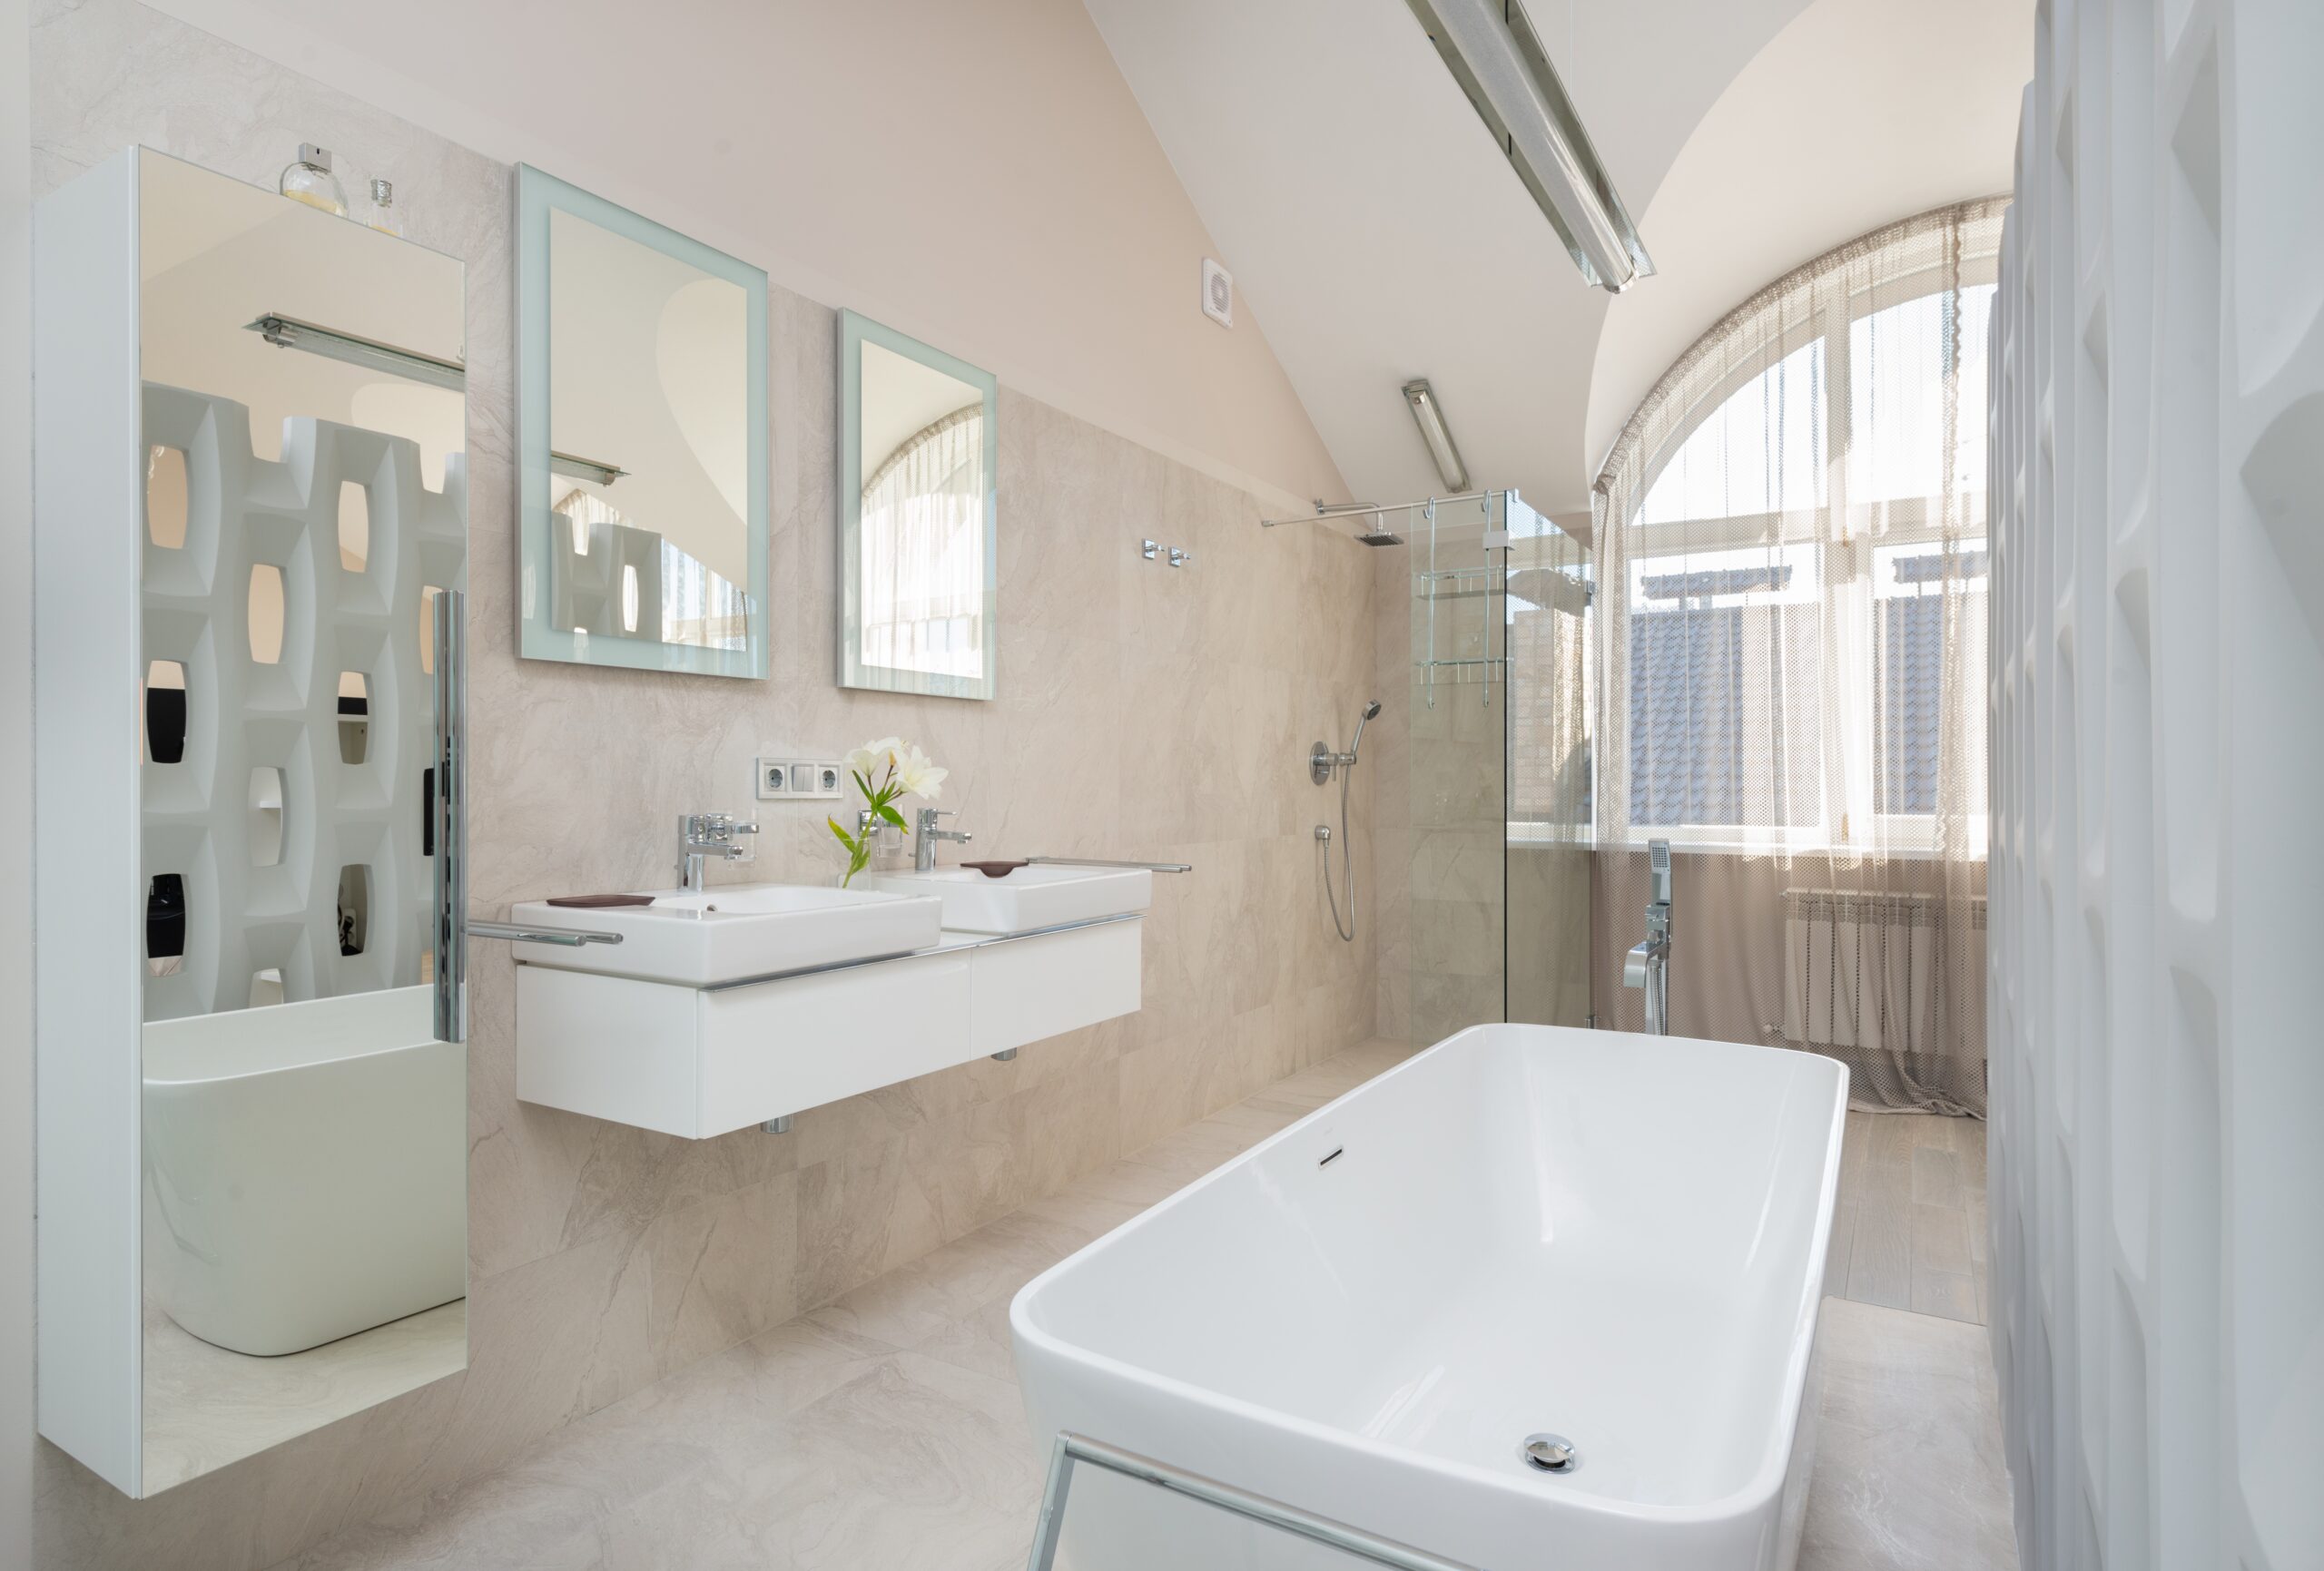 Key Factors to Consider While Hiring a Bathroom Remodeling Expert